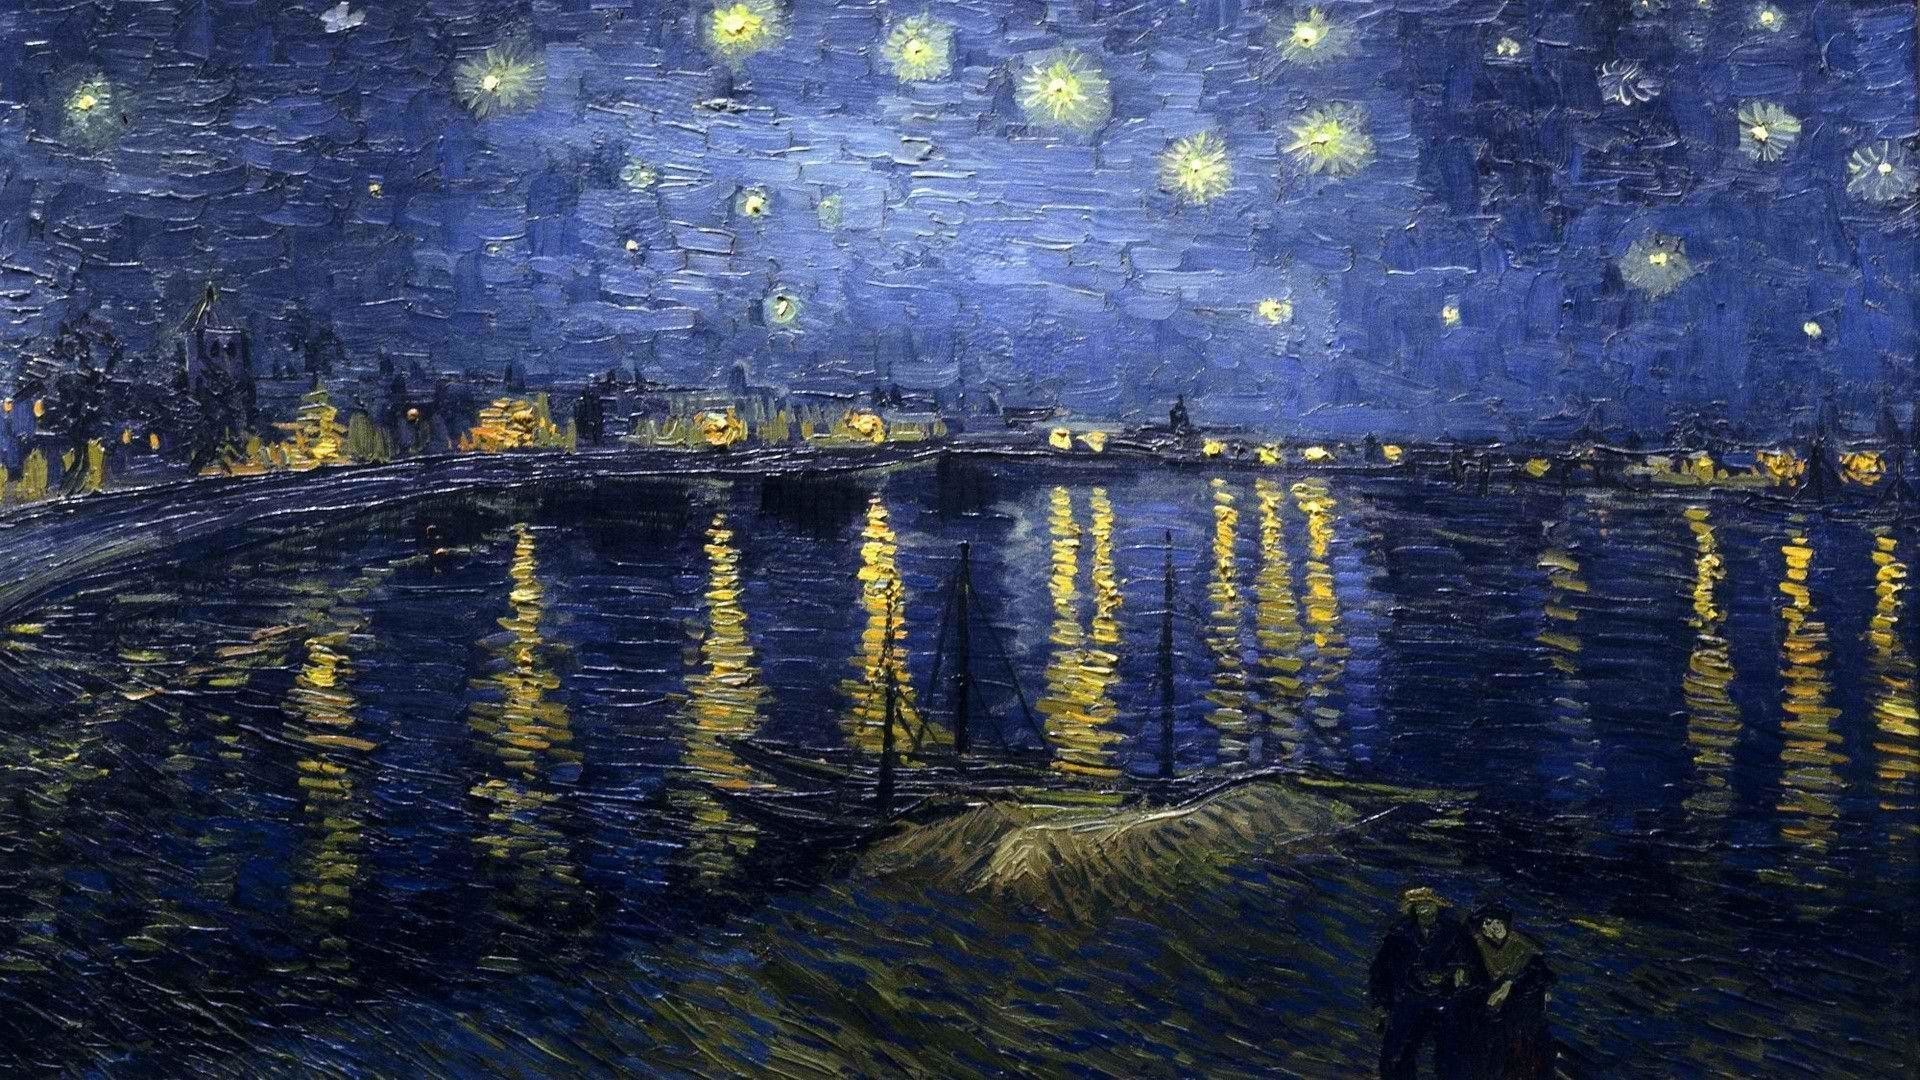 1920x1080 Starry Night Over The Rhone - Nature Wallpapers (8995) ilikewalls.